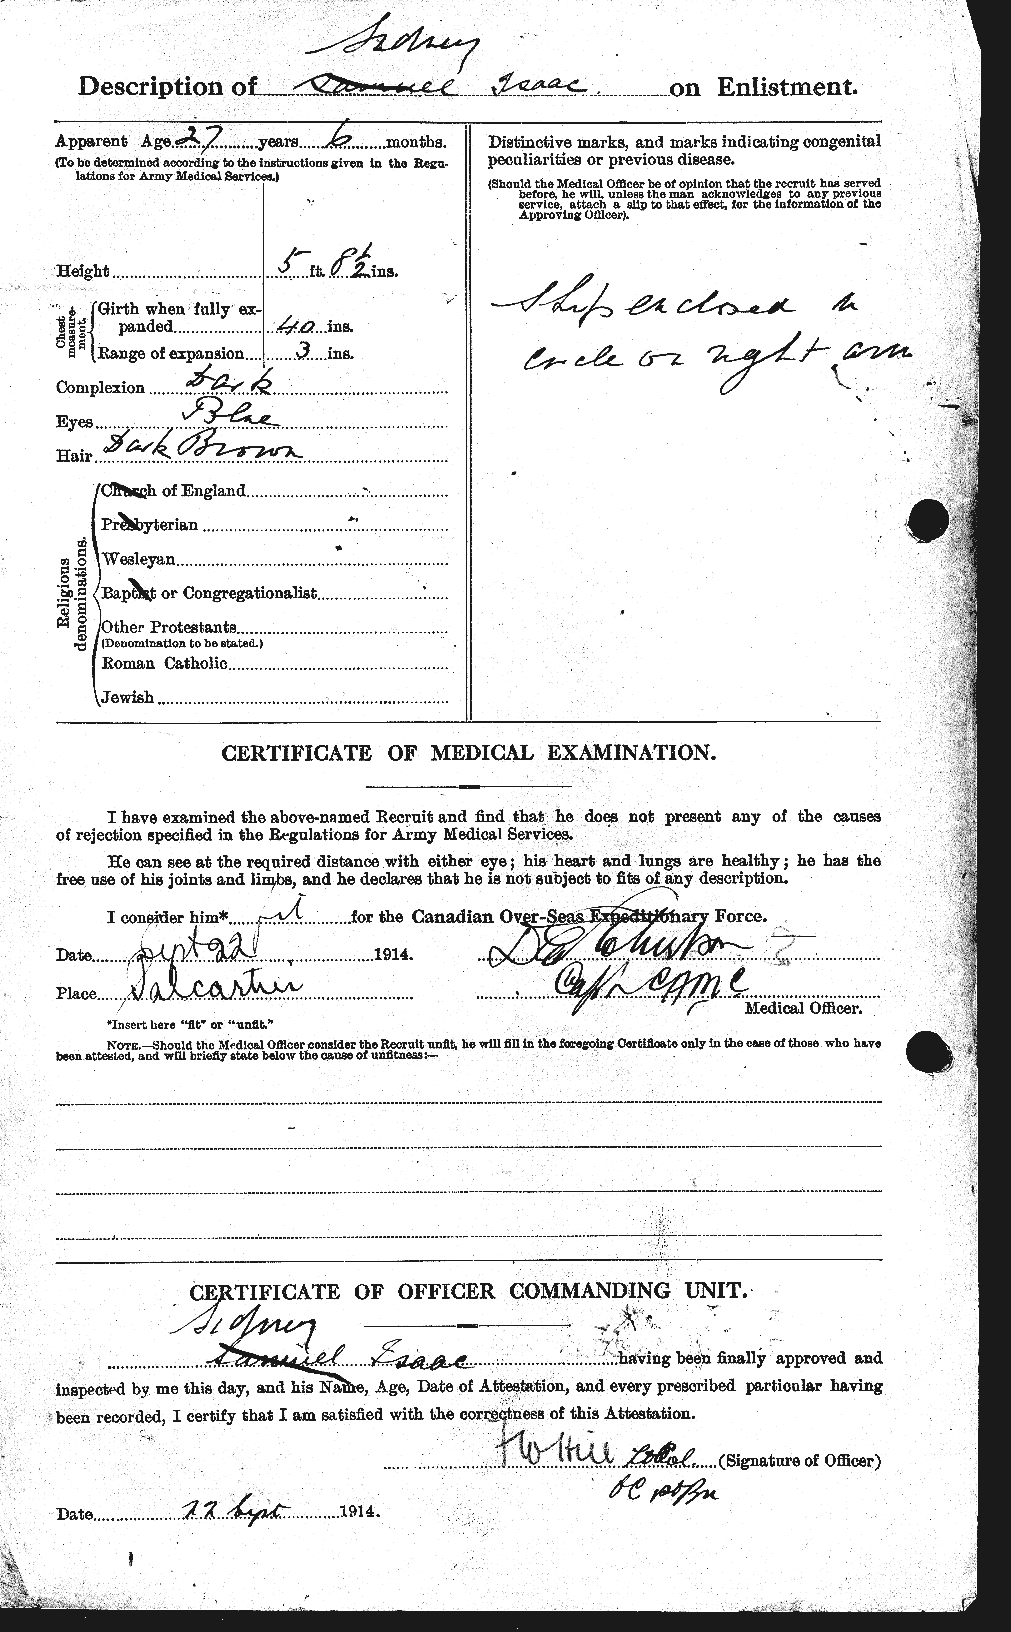 Personnel Records of the First World War - CEF 413911b